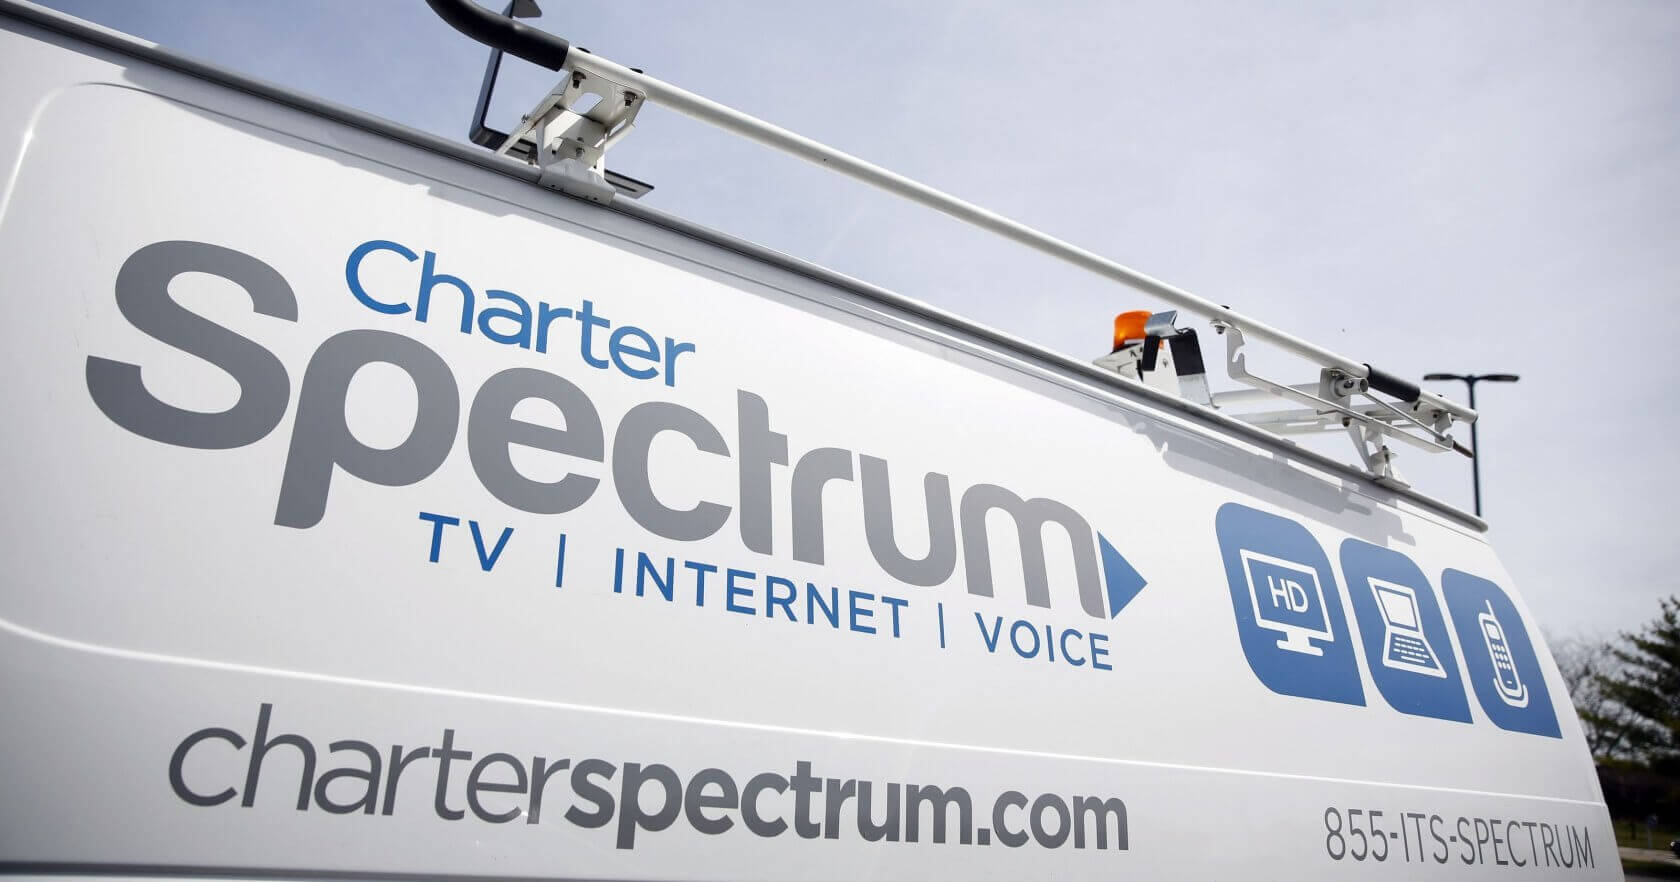 Charter and New York reach deal allowing ISP to remain in the state